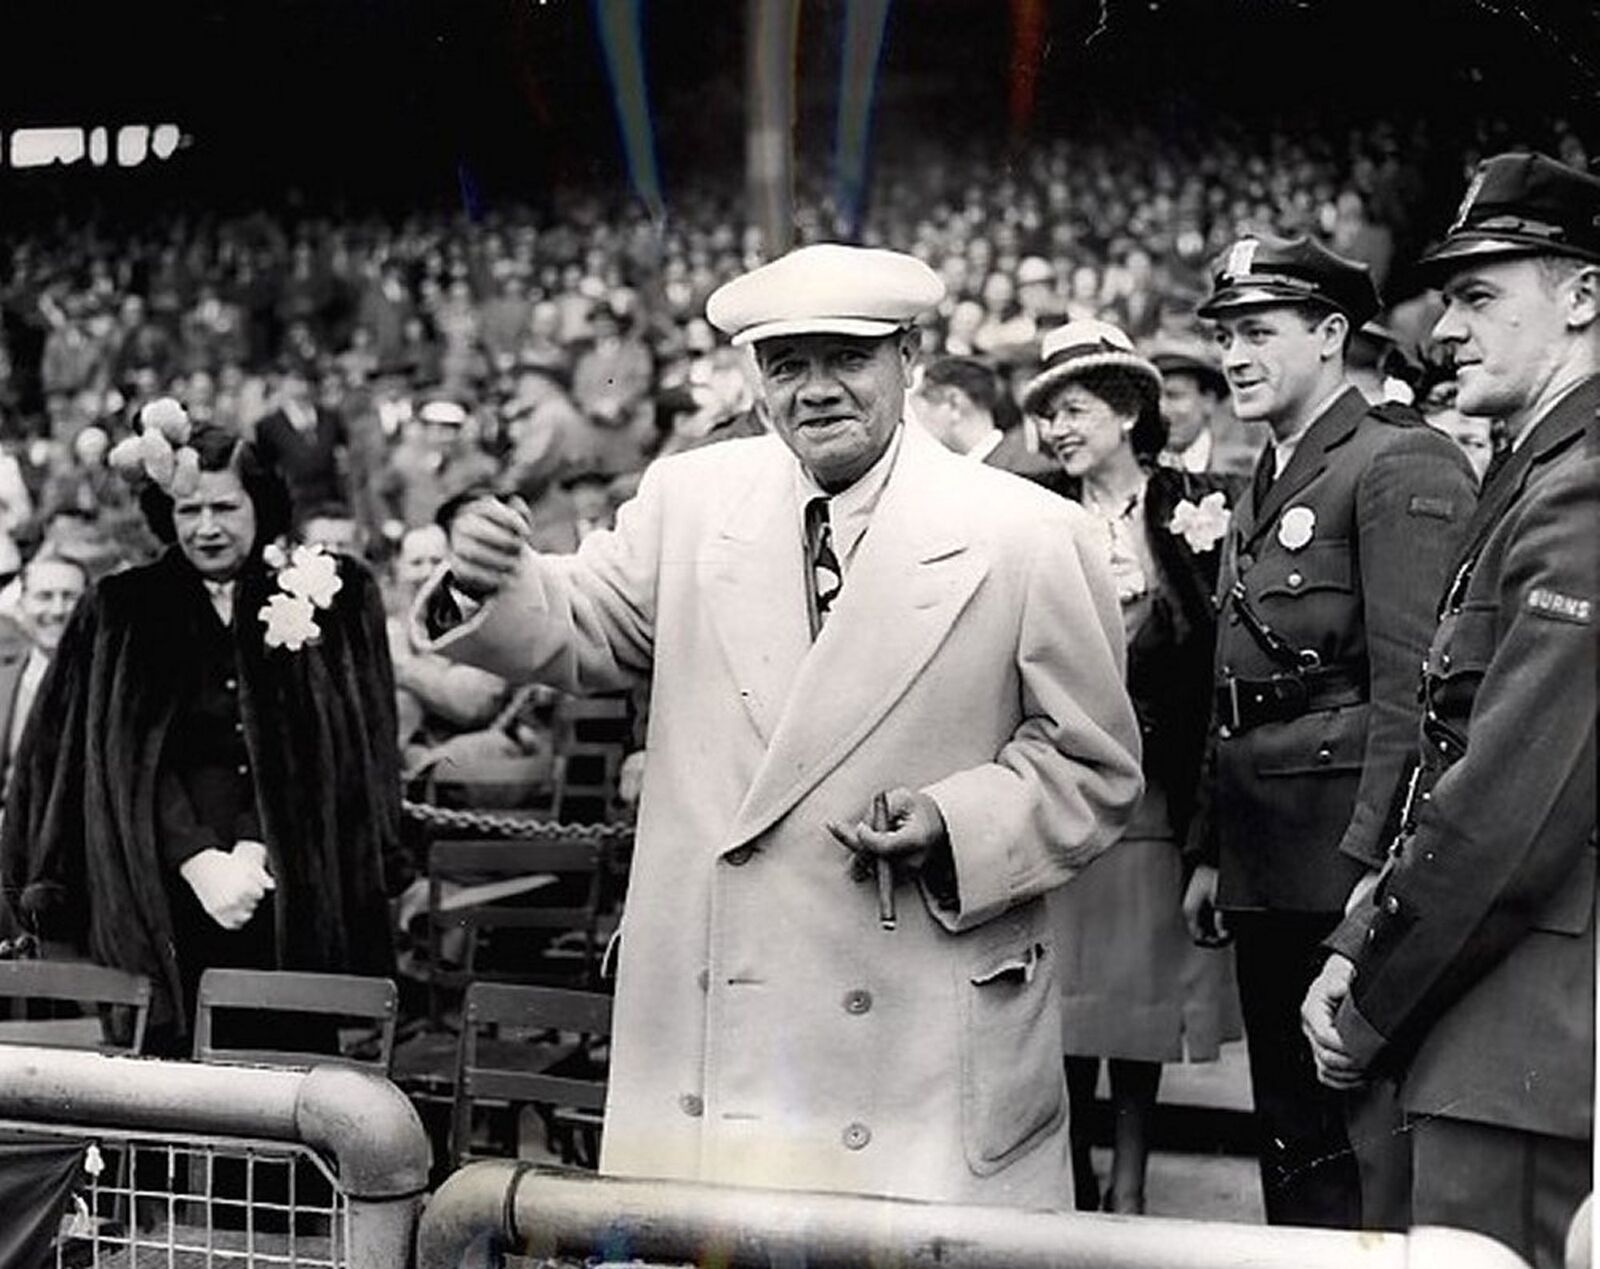 1948 BABE RUTH at the POLO GROUNDS Photo  (199-u)